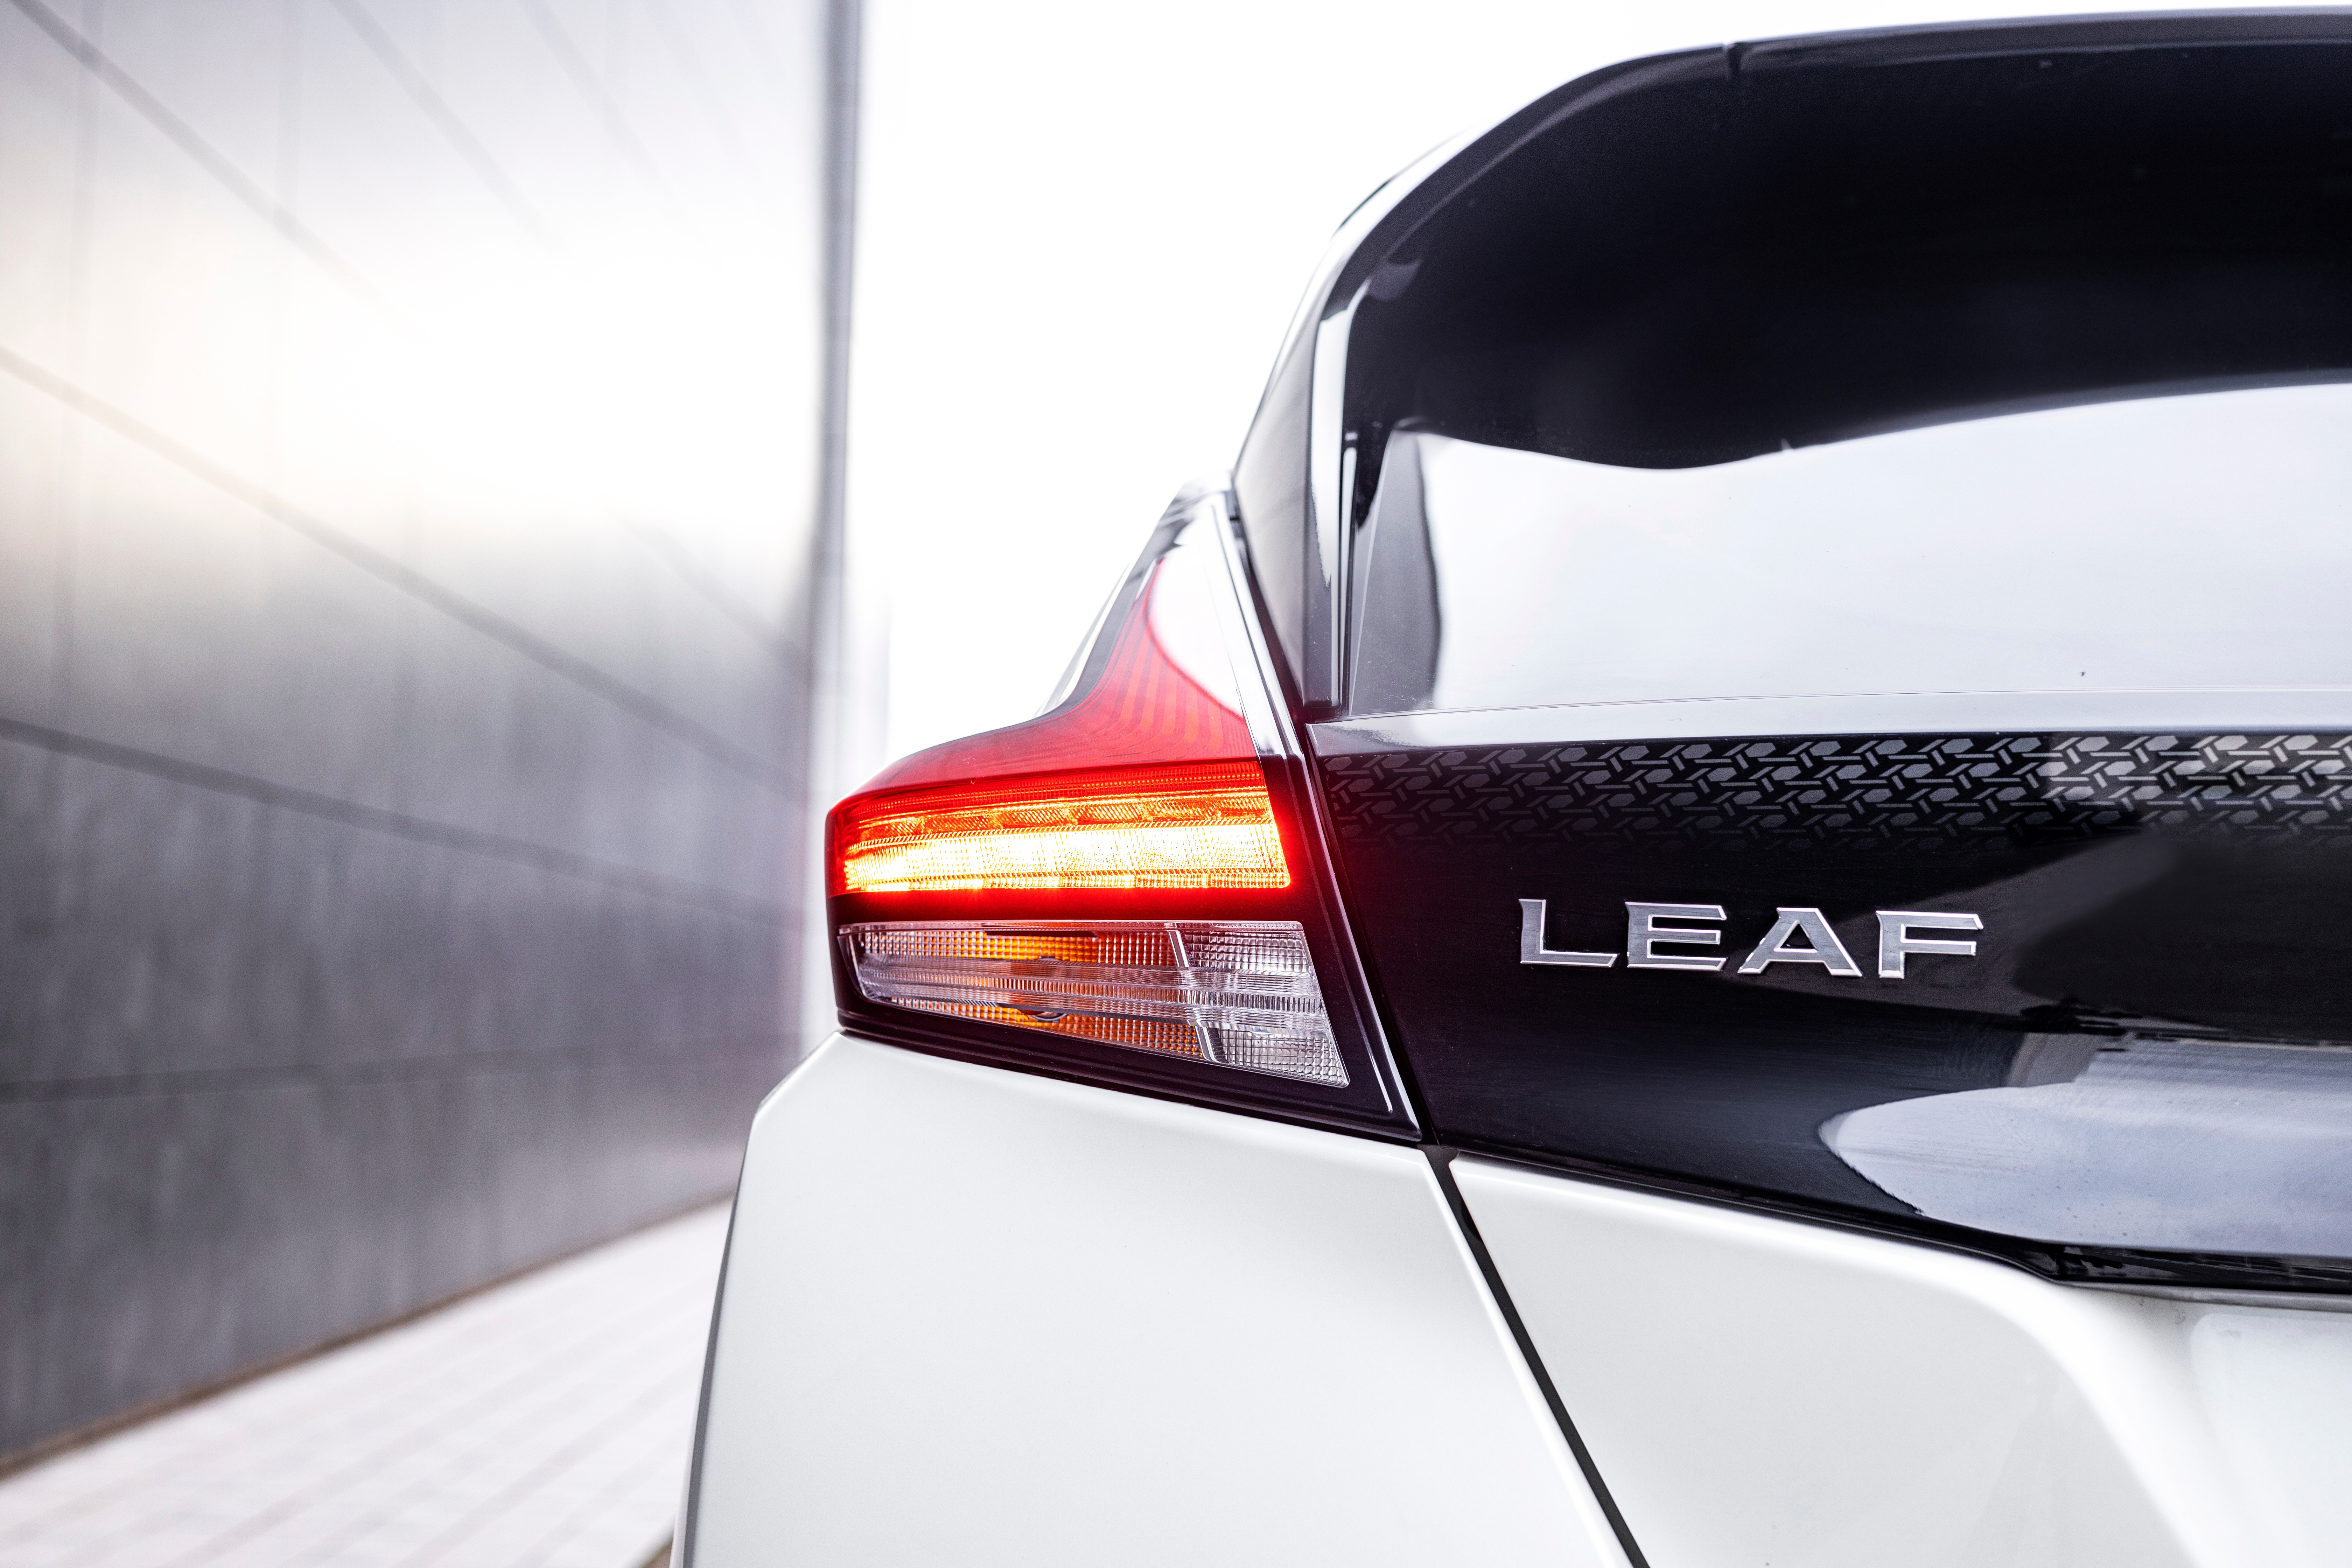 Price reduction for Nissan LEAF 40kWh and 62kWh